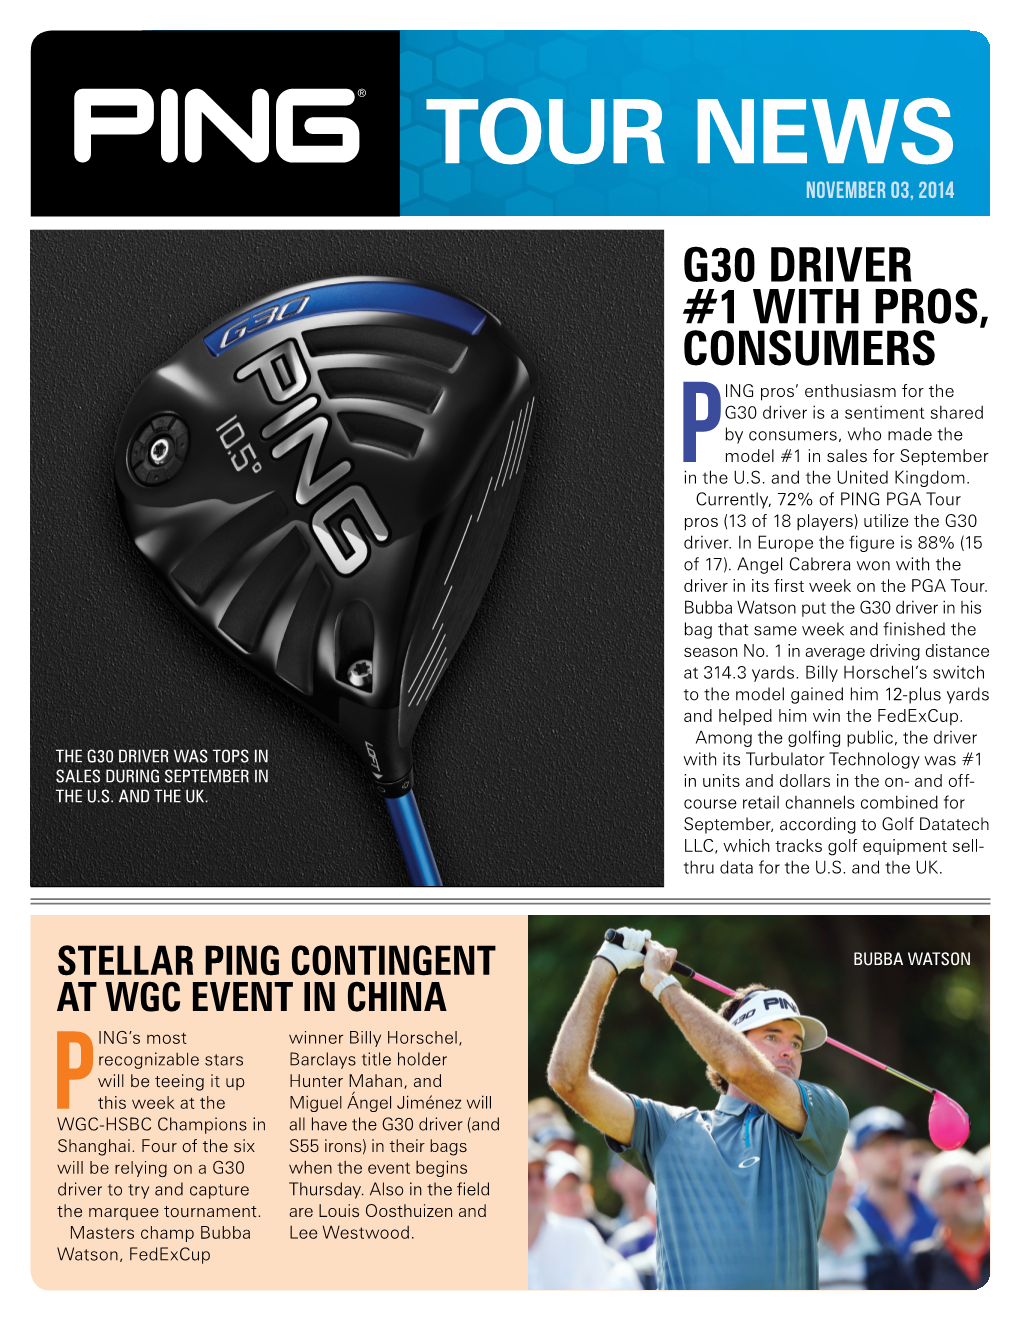 G30 Driver #1 with Pros, Consumers